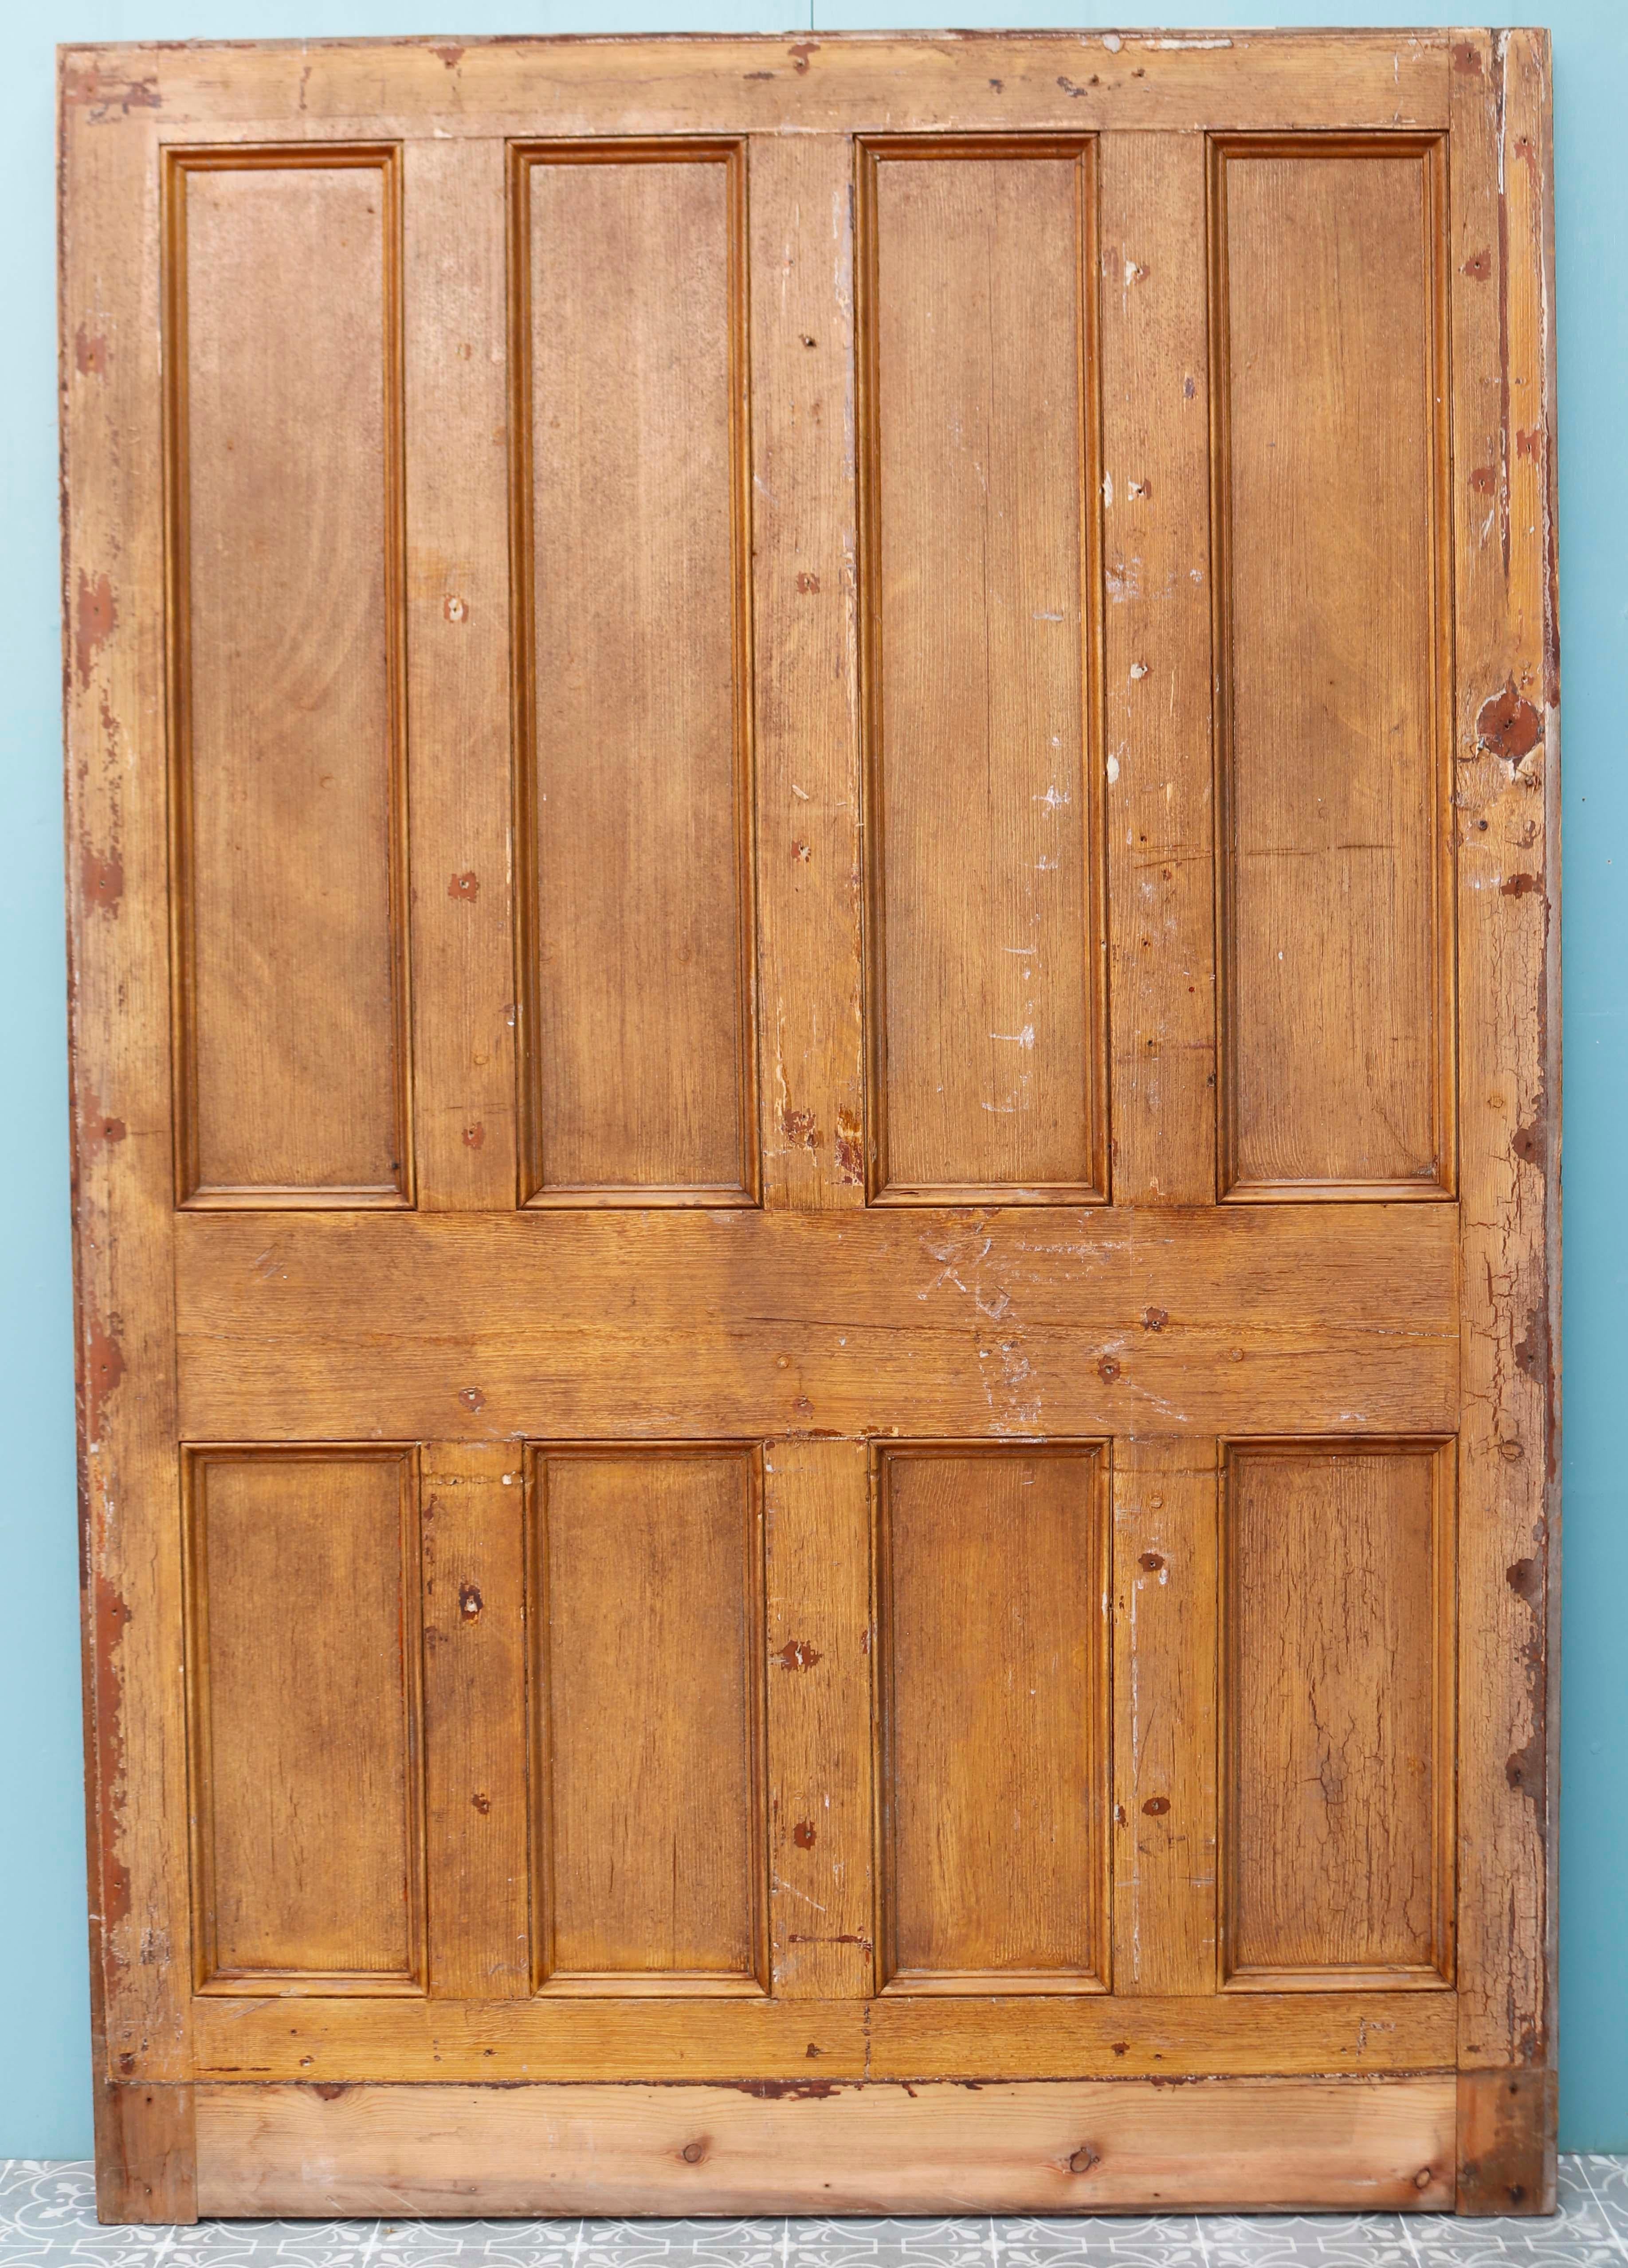 Three reclaimed wooden partitions / panelling. Three sections of panelling that would be well suited for repurposing as sliding doors or room partitioning. They can be easily cut down to fit your space.

Additional Dimensions

The size and